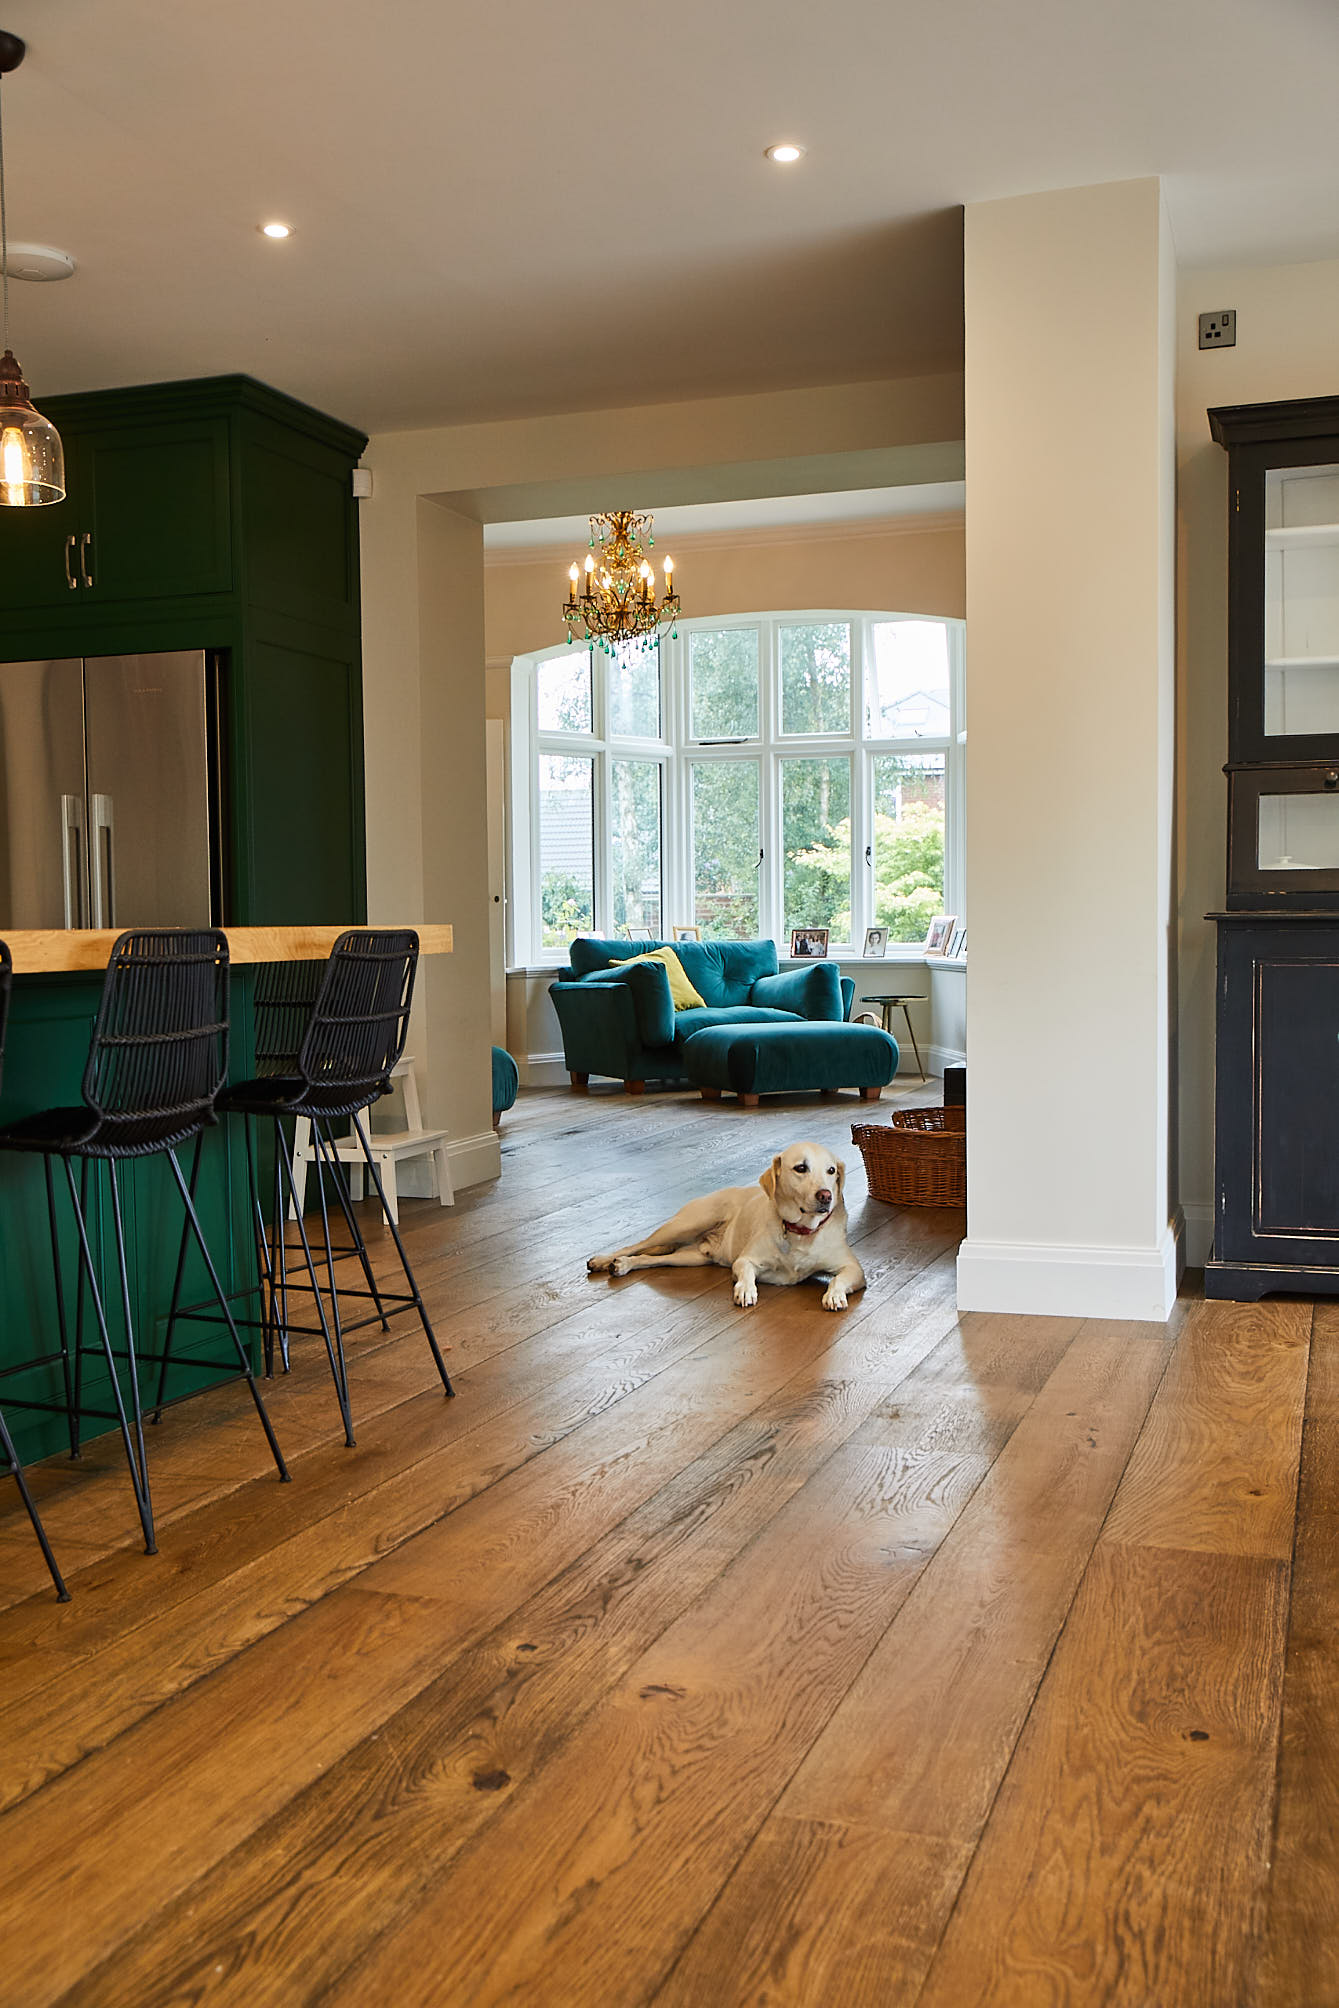 Rustic engineered oak kitchen flooring with dog laying down